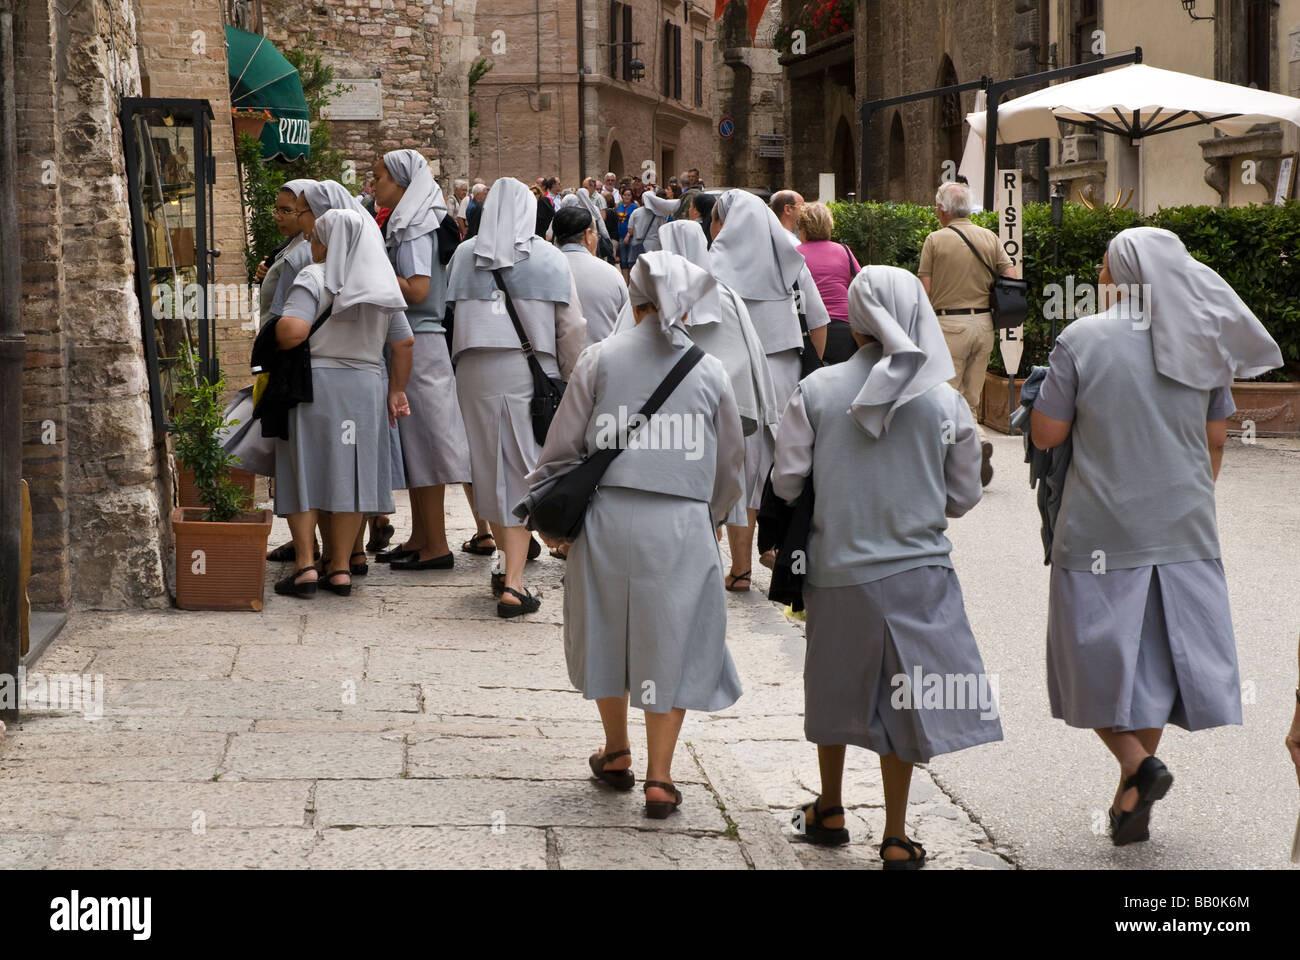 Nuns viewing menu for lunch in Assisi Stock Photo